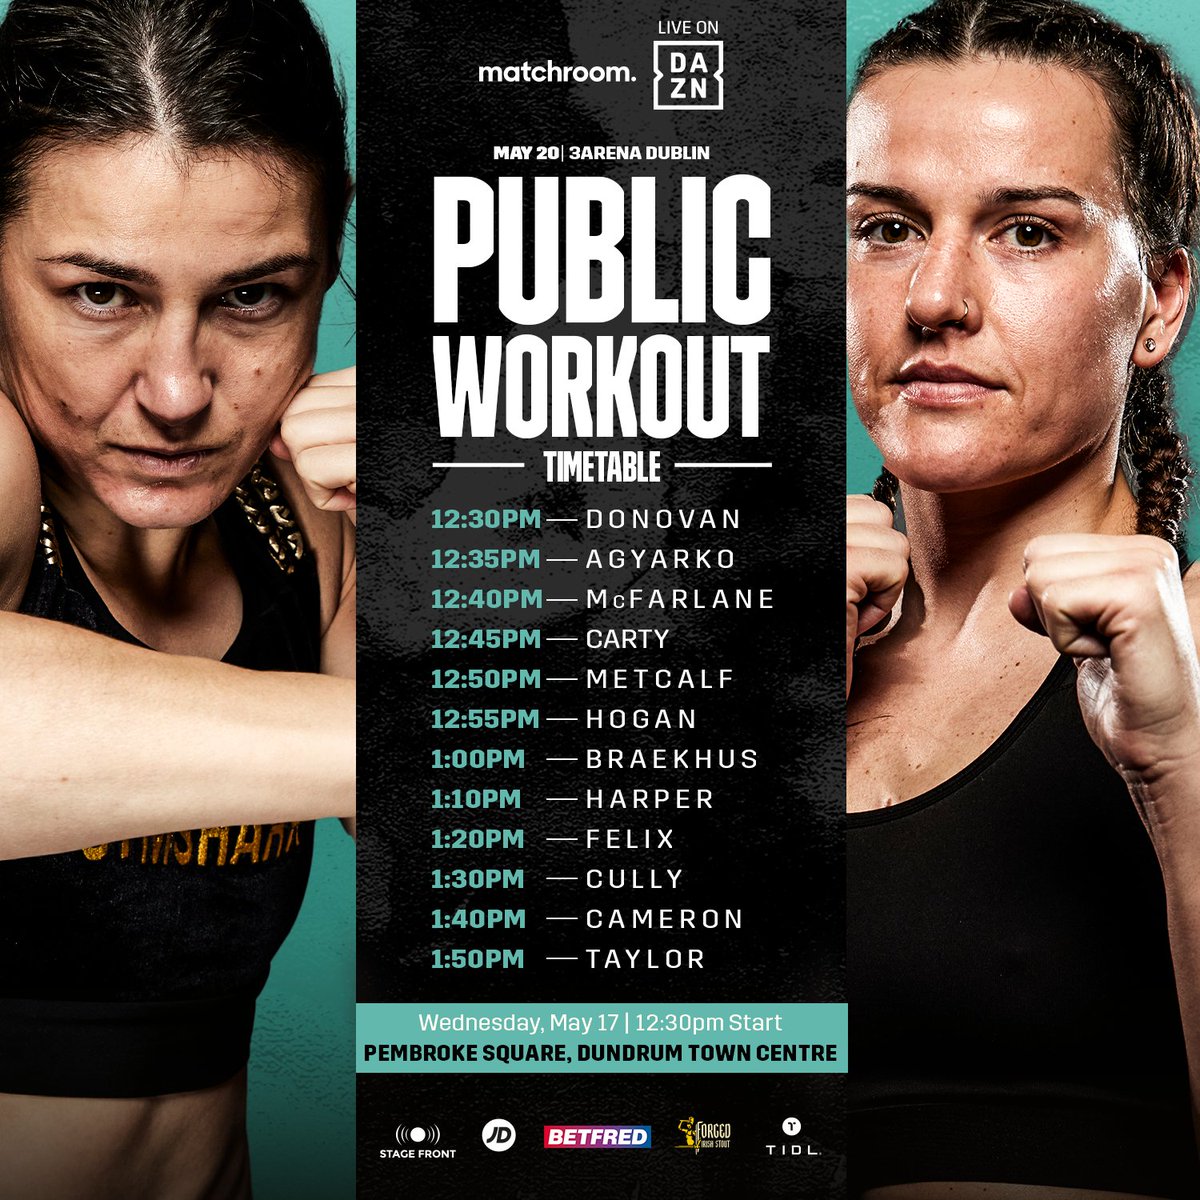 📜 Running order for today's #TaylorCameron public workout at Pembroke Square See you all there 👊